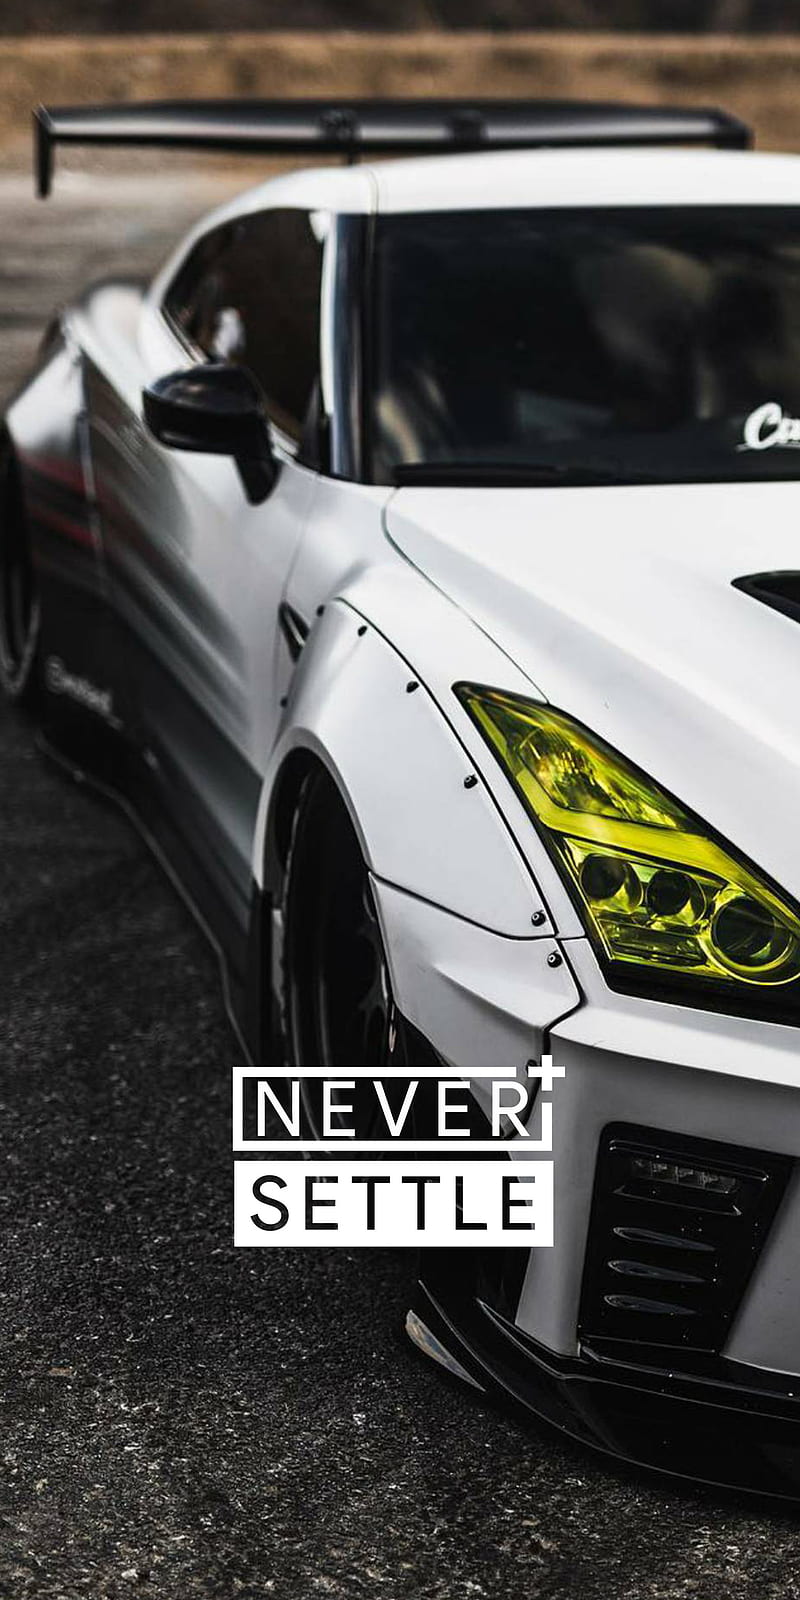 1920x1080px, 1080P free download | Never settle logos, car, iphone